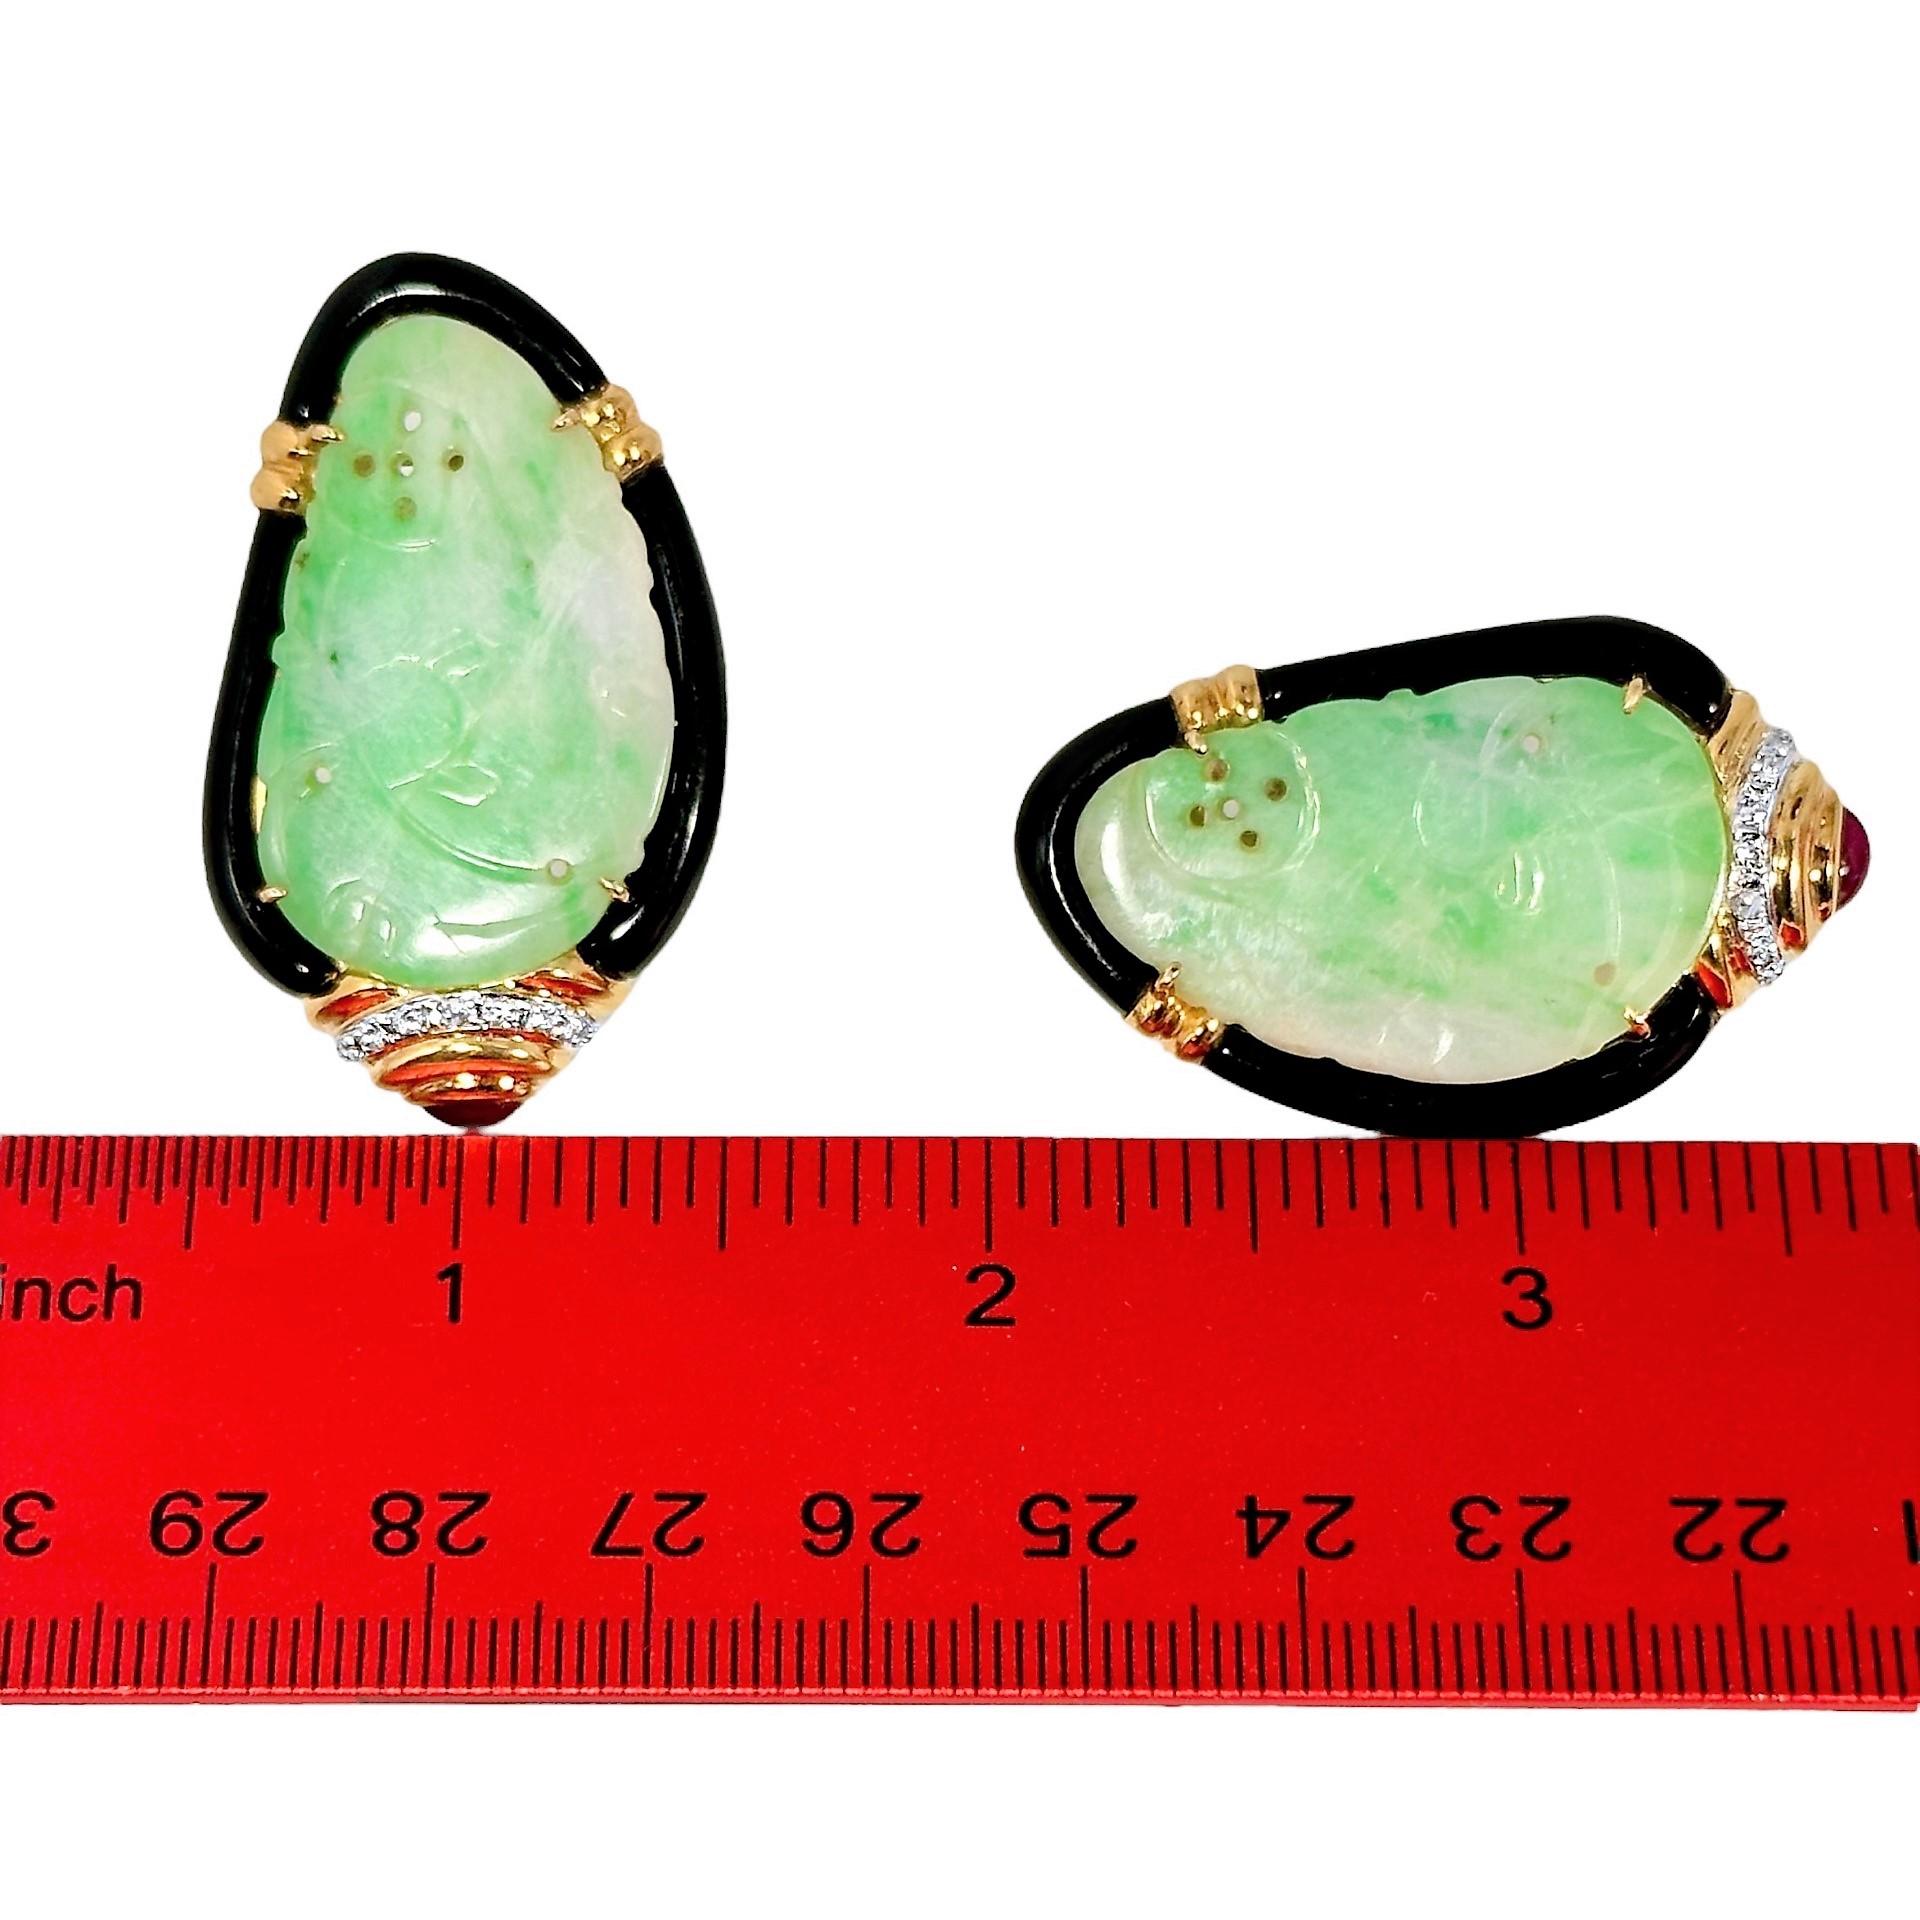 Women's Grand Scale 18k Yellow Gold, Jadeite Jade, Ruby, Diamond and Onyx Earrings For Sale